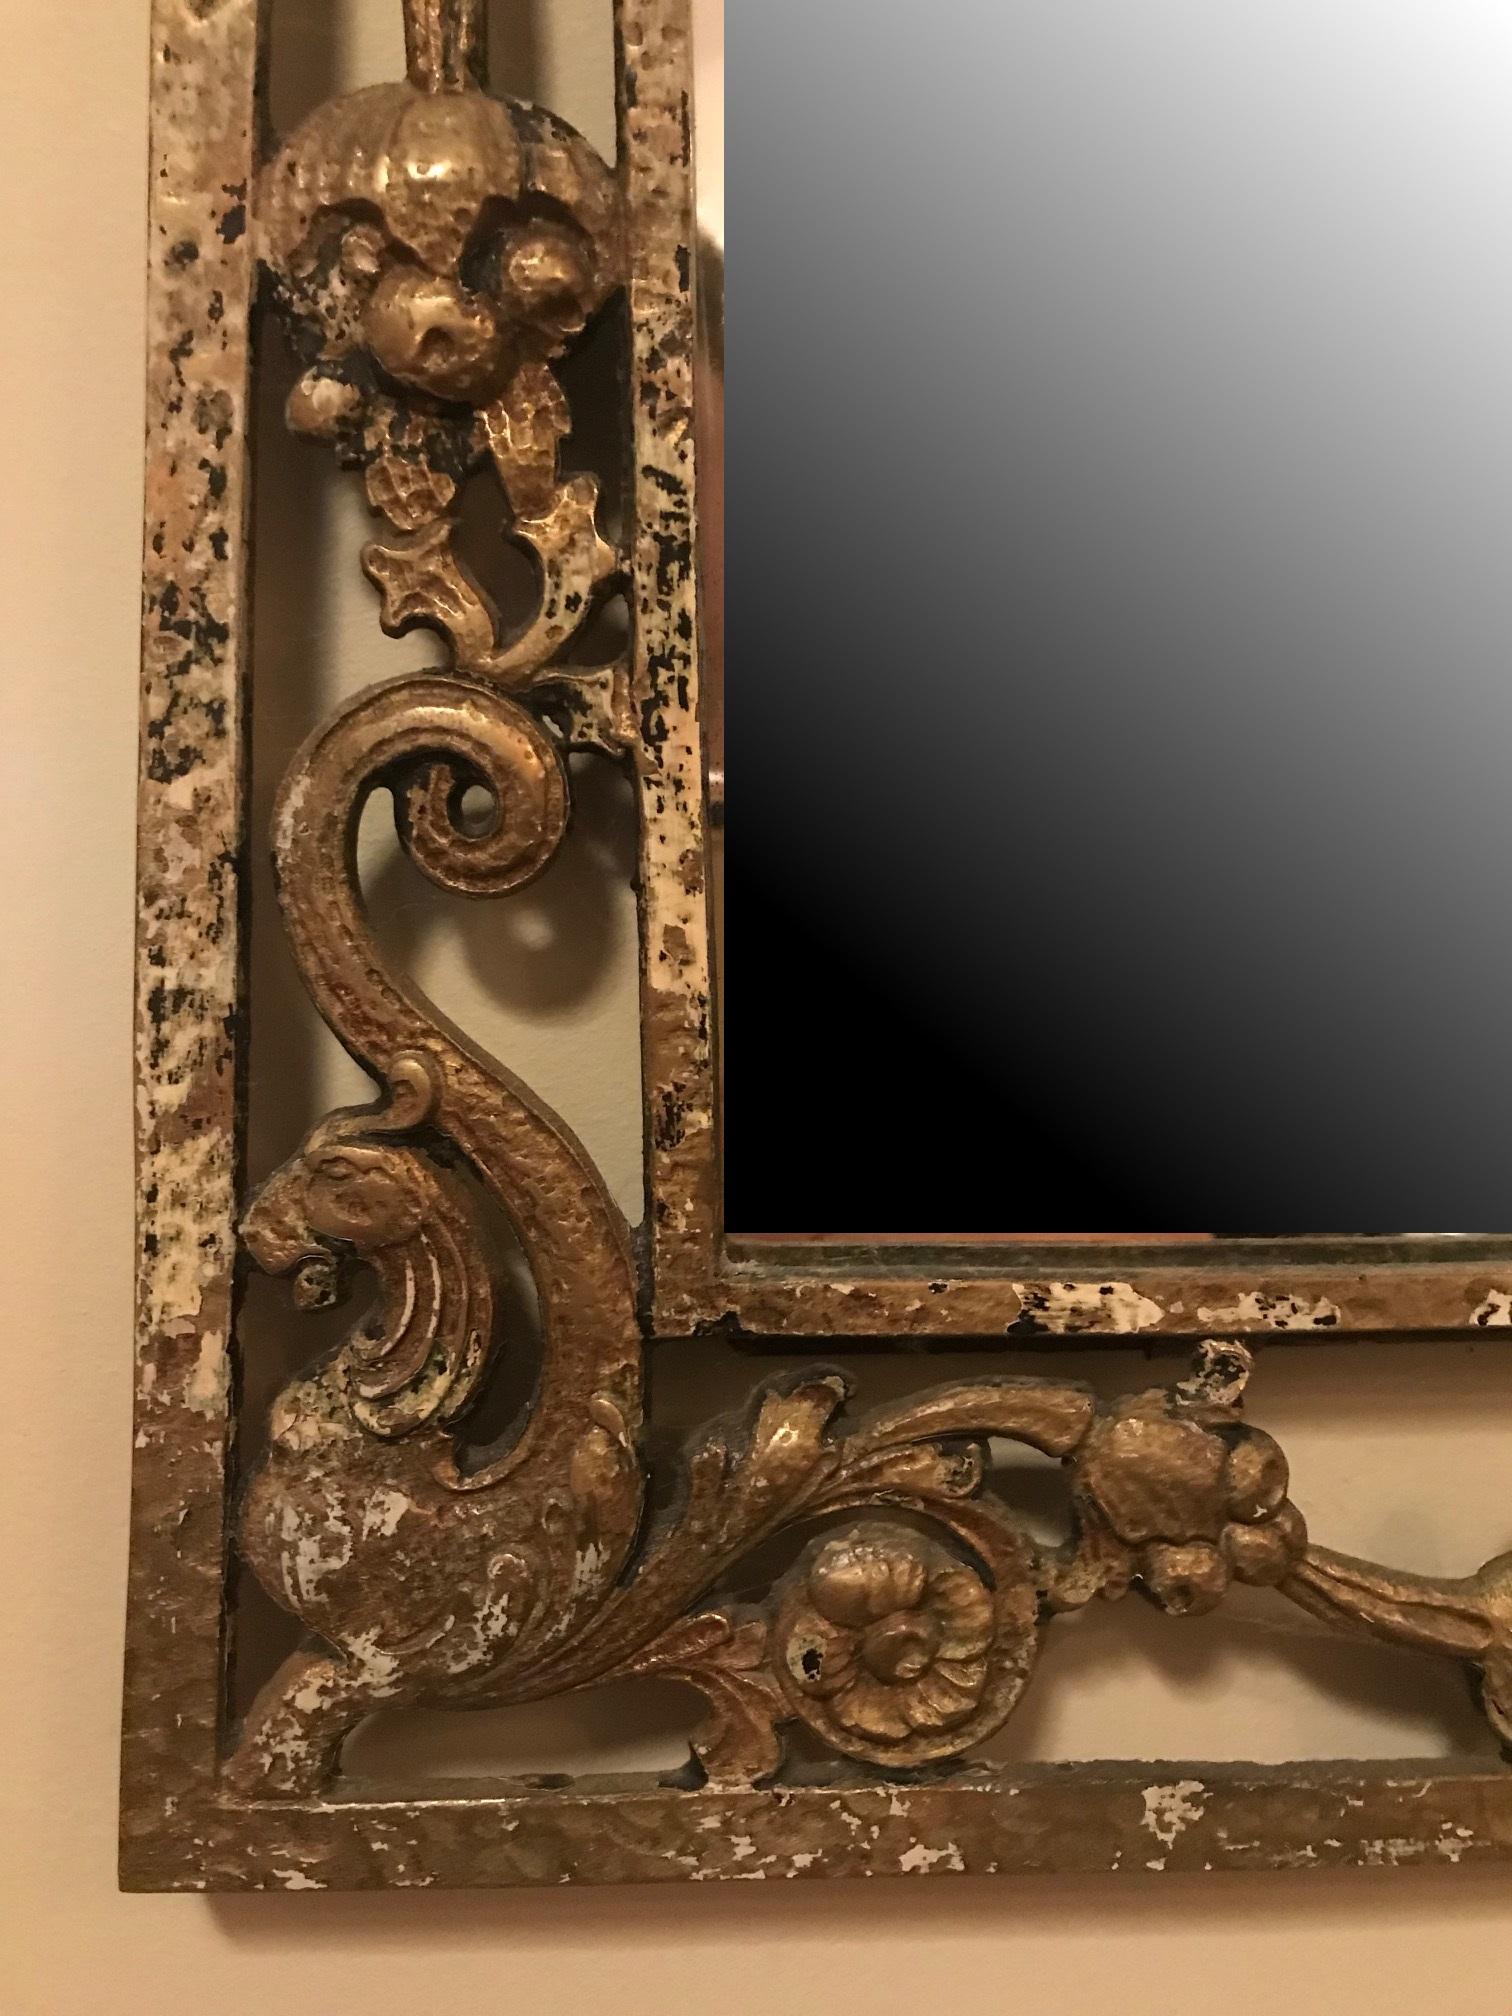 This beautiful 1920s Arts & Crafts mirror is designed by Oscar Bach. It is made of cast iron in an openwork design with ornate, neo gothic elements.

The mirror measures 34?H x 0.5? D x 24.50? W.

Oscar Bruno Bach (Breslau, Germany, 1884 - New York,